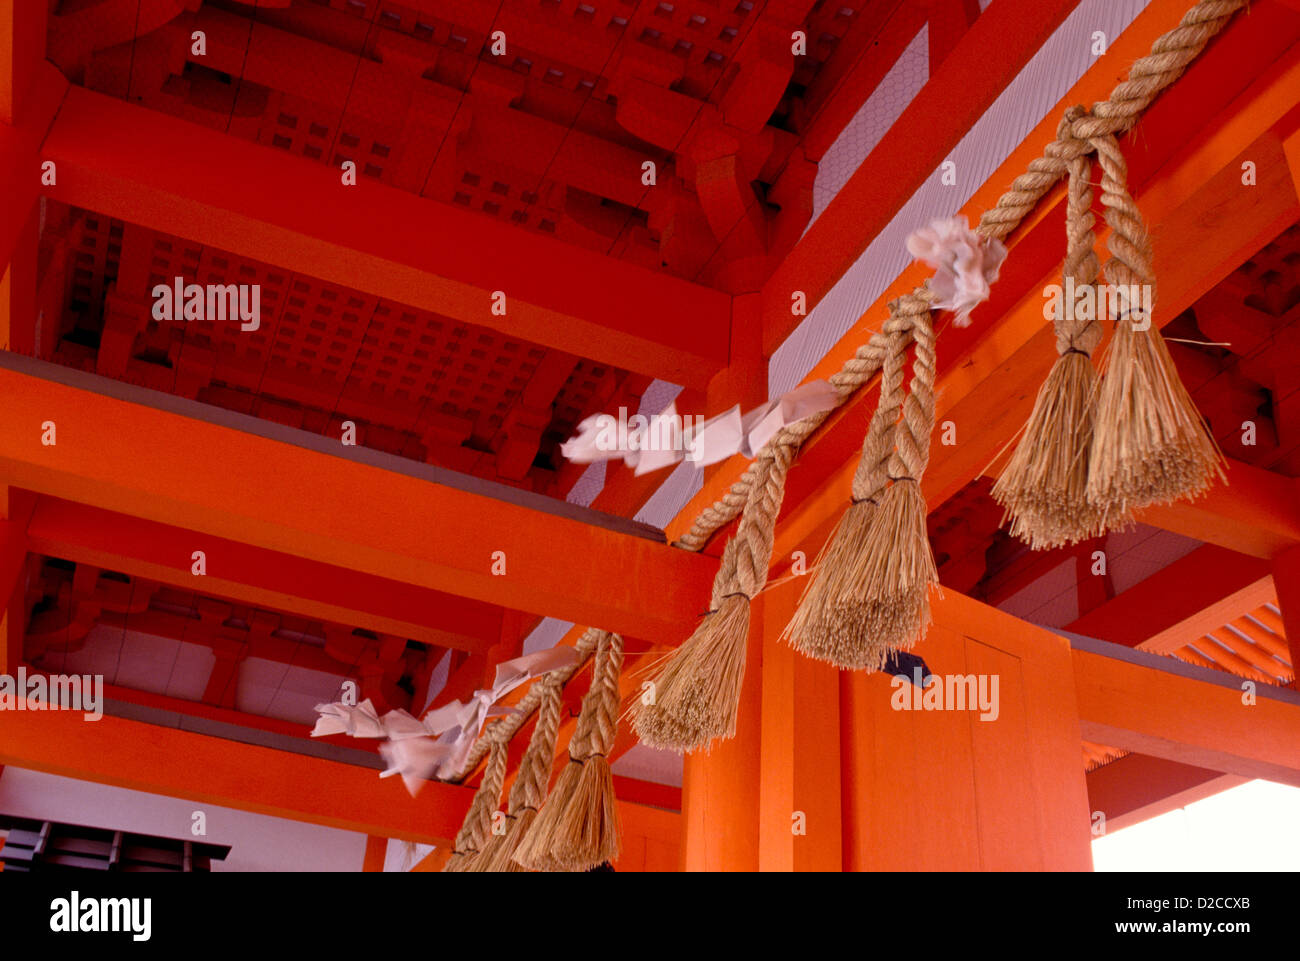 Japan, Kyoto. Detail Of Heian Shrine, Featuring Decorative Rope Stock Photo